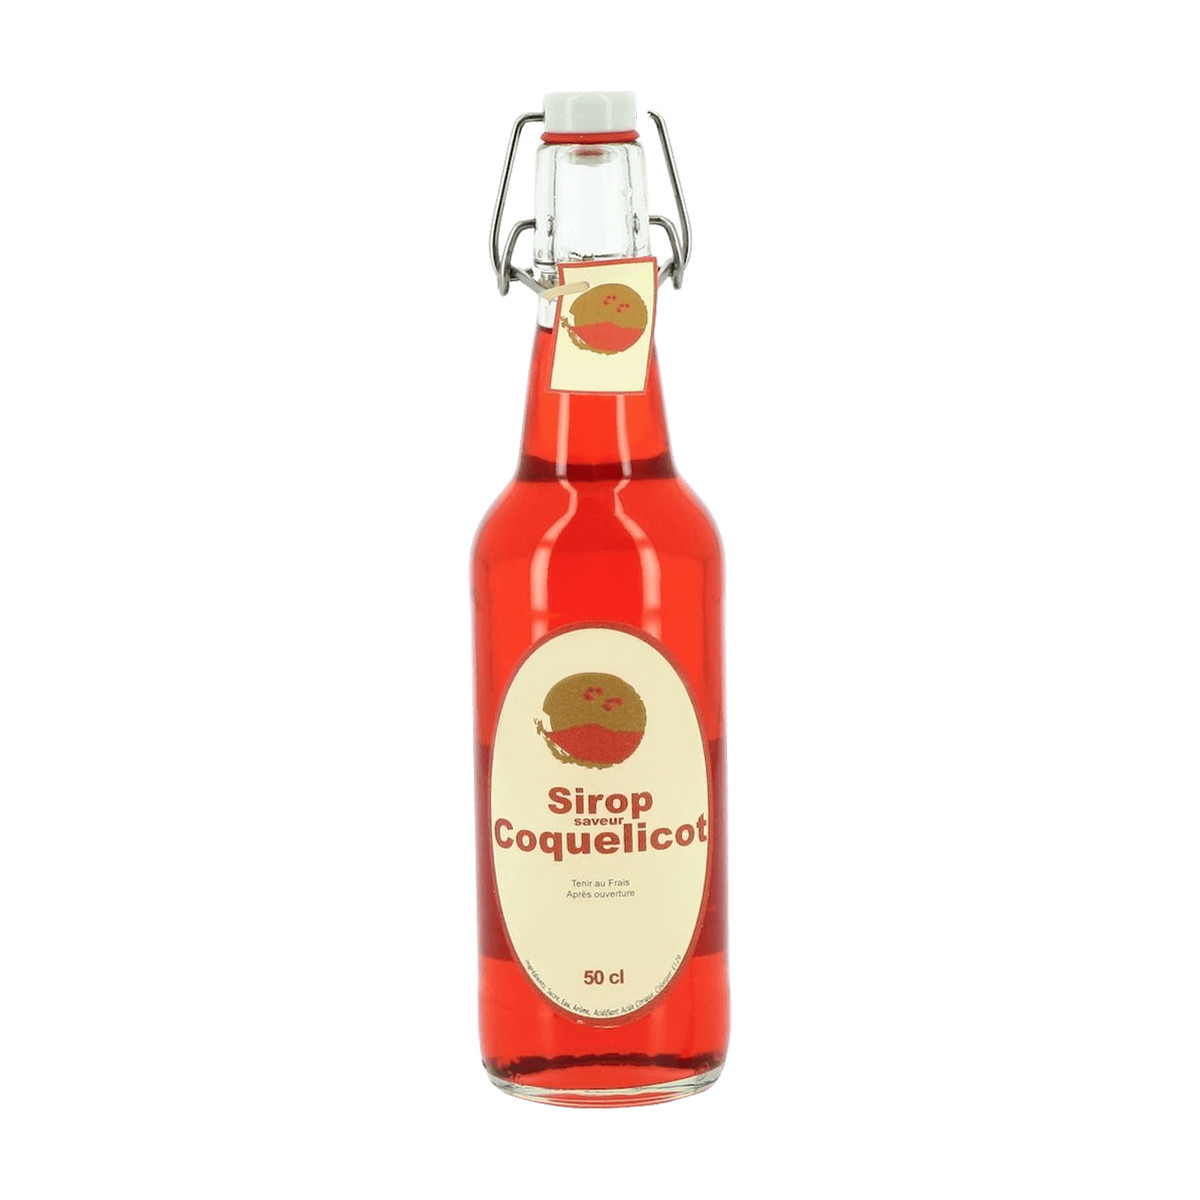 Sirop Coquelicot 50cl